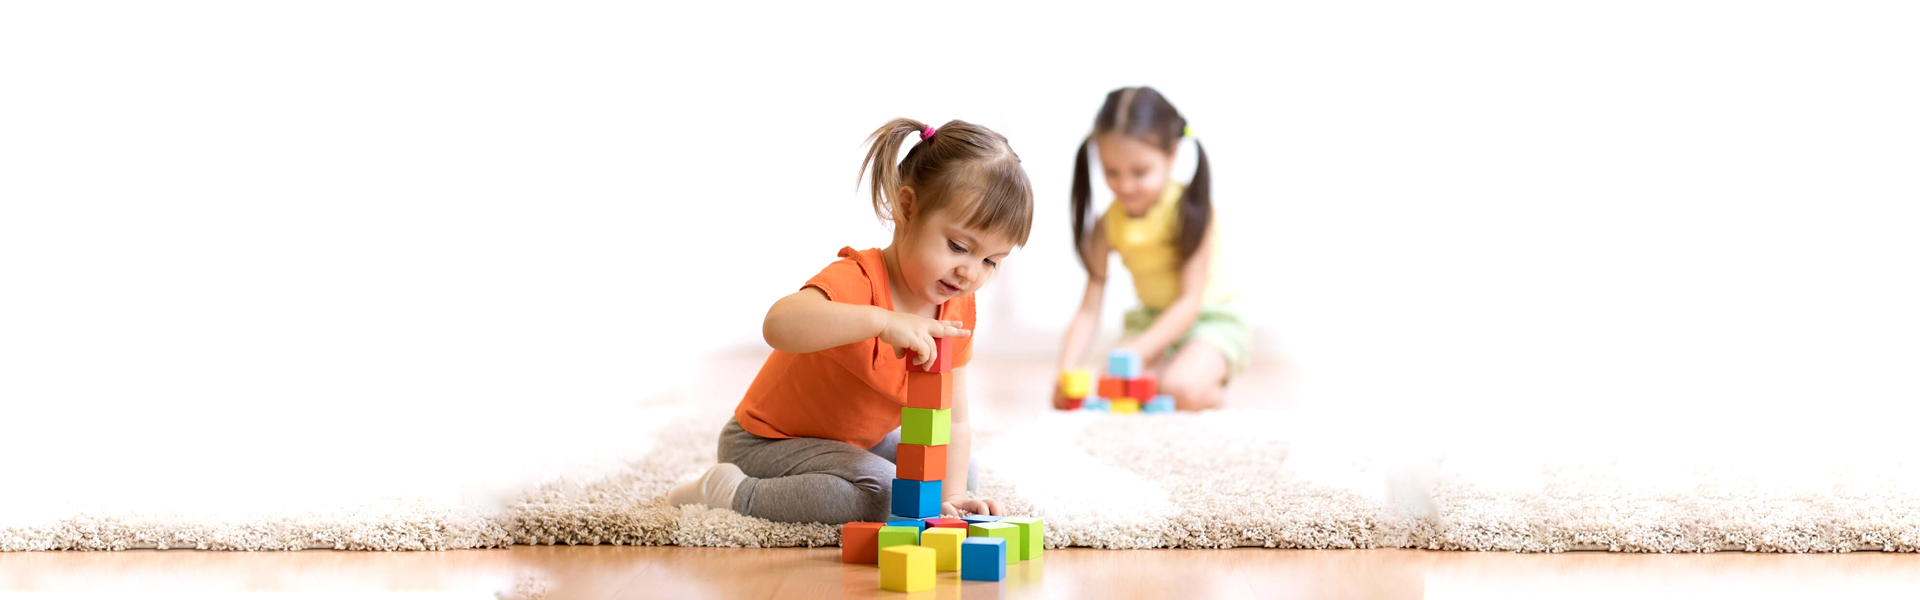 How to Select the Best Daycare for Your Family